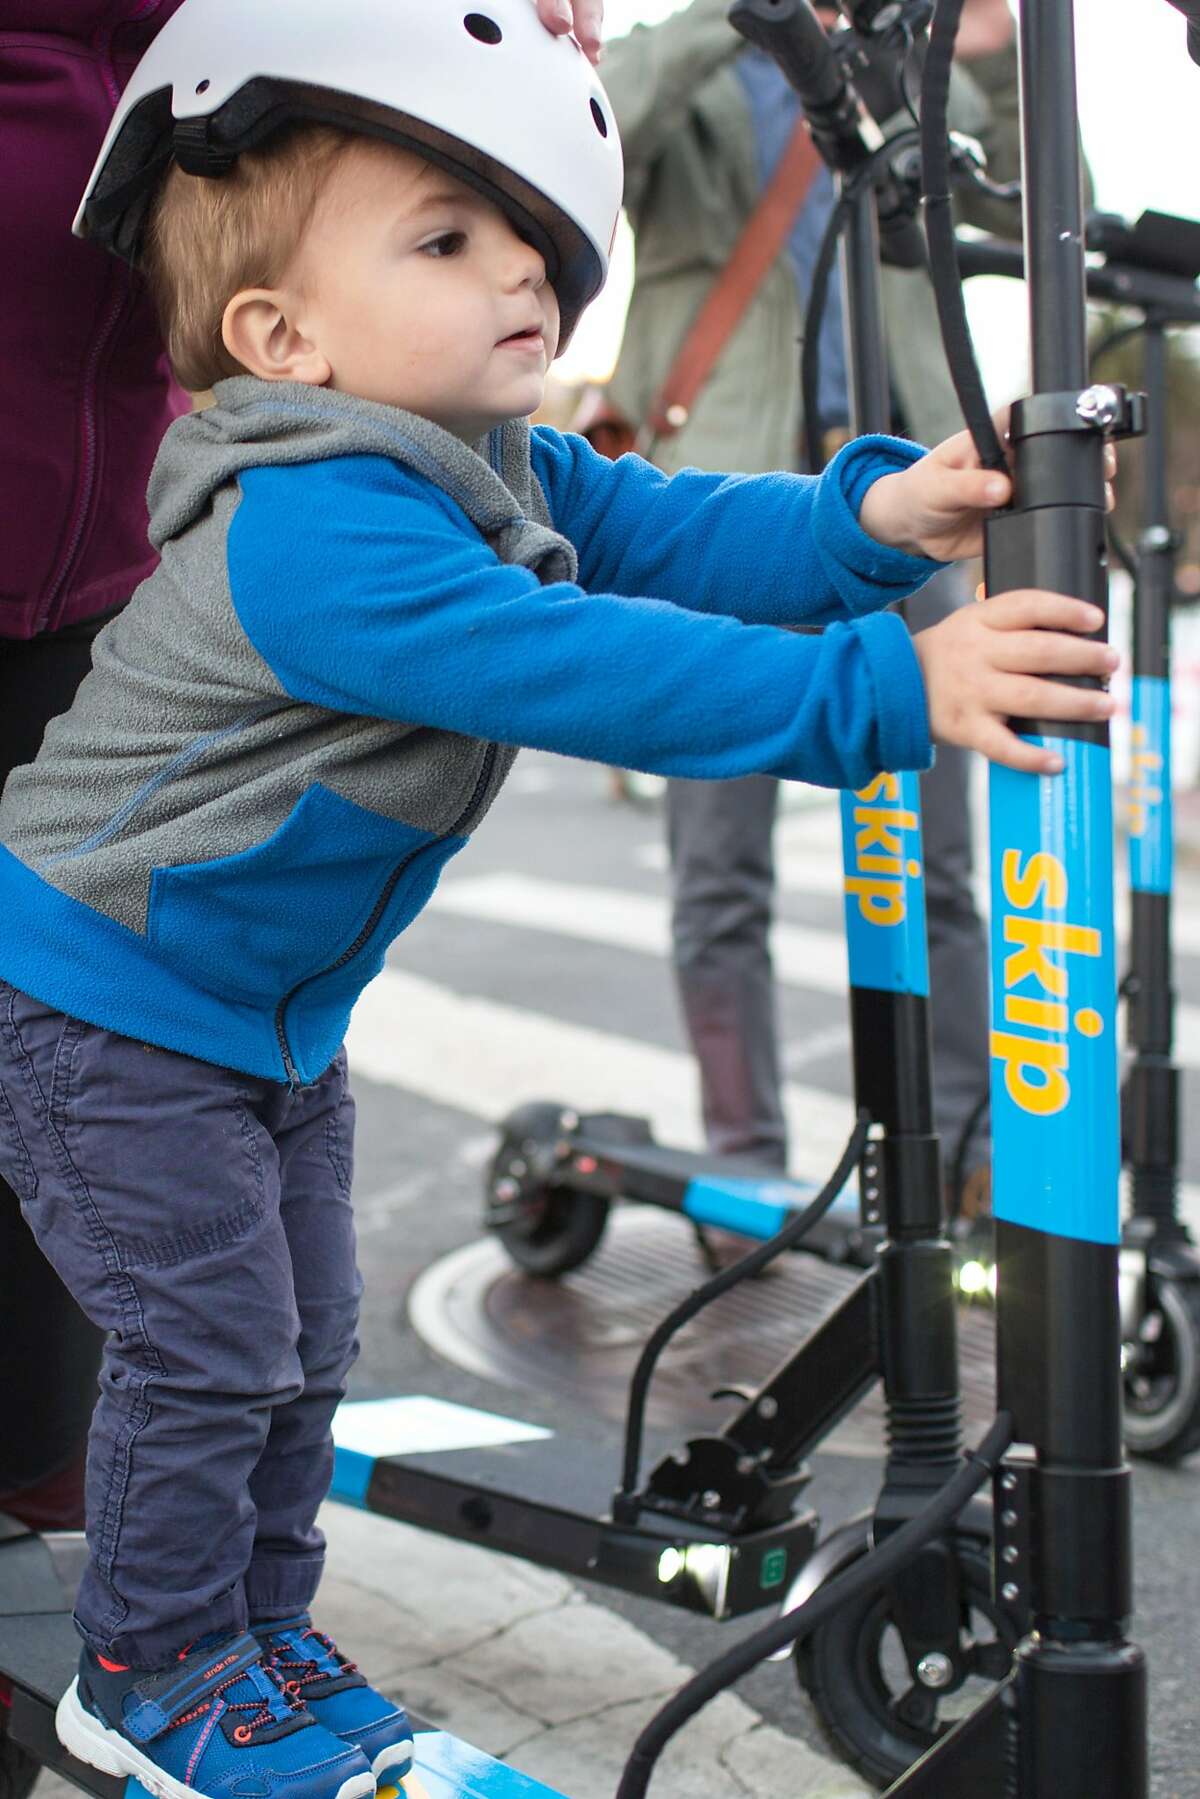 Milo, 23 months, stands on a Skip scooter held by his mom Susan Kimberlin at the demonstration booth of Skip, a scooter rental company, at the Castro Farmers' Market. Wednesday, October 10, 2018 in San Francisco, Calif.